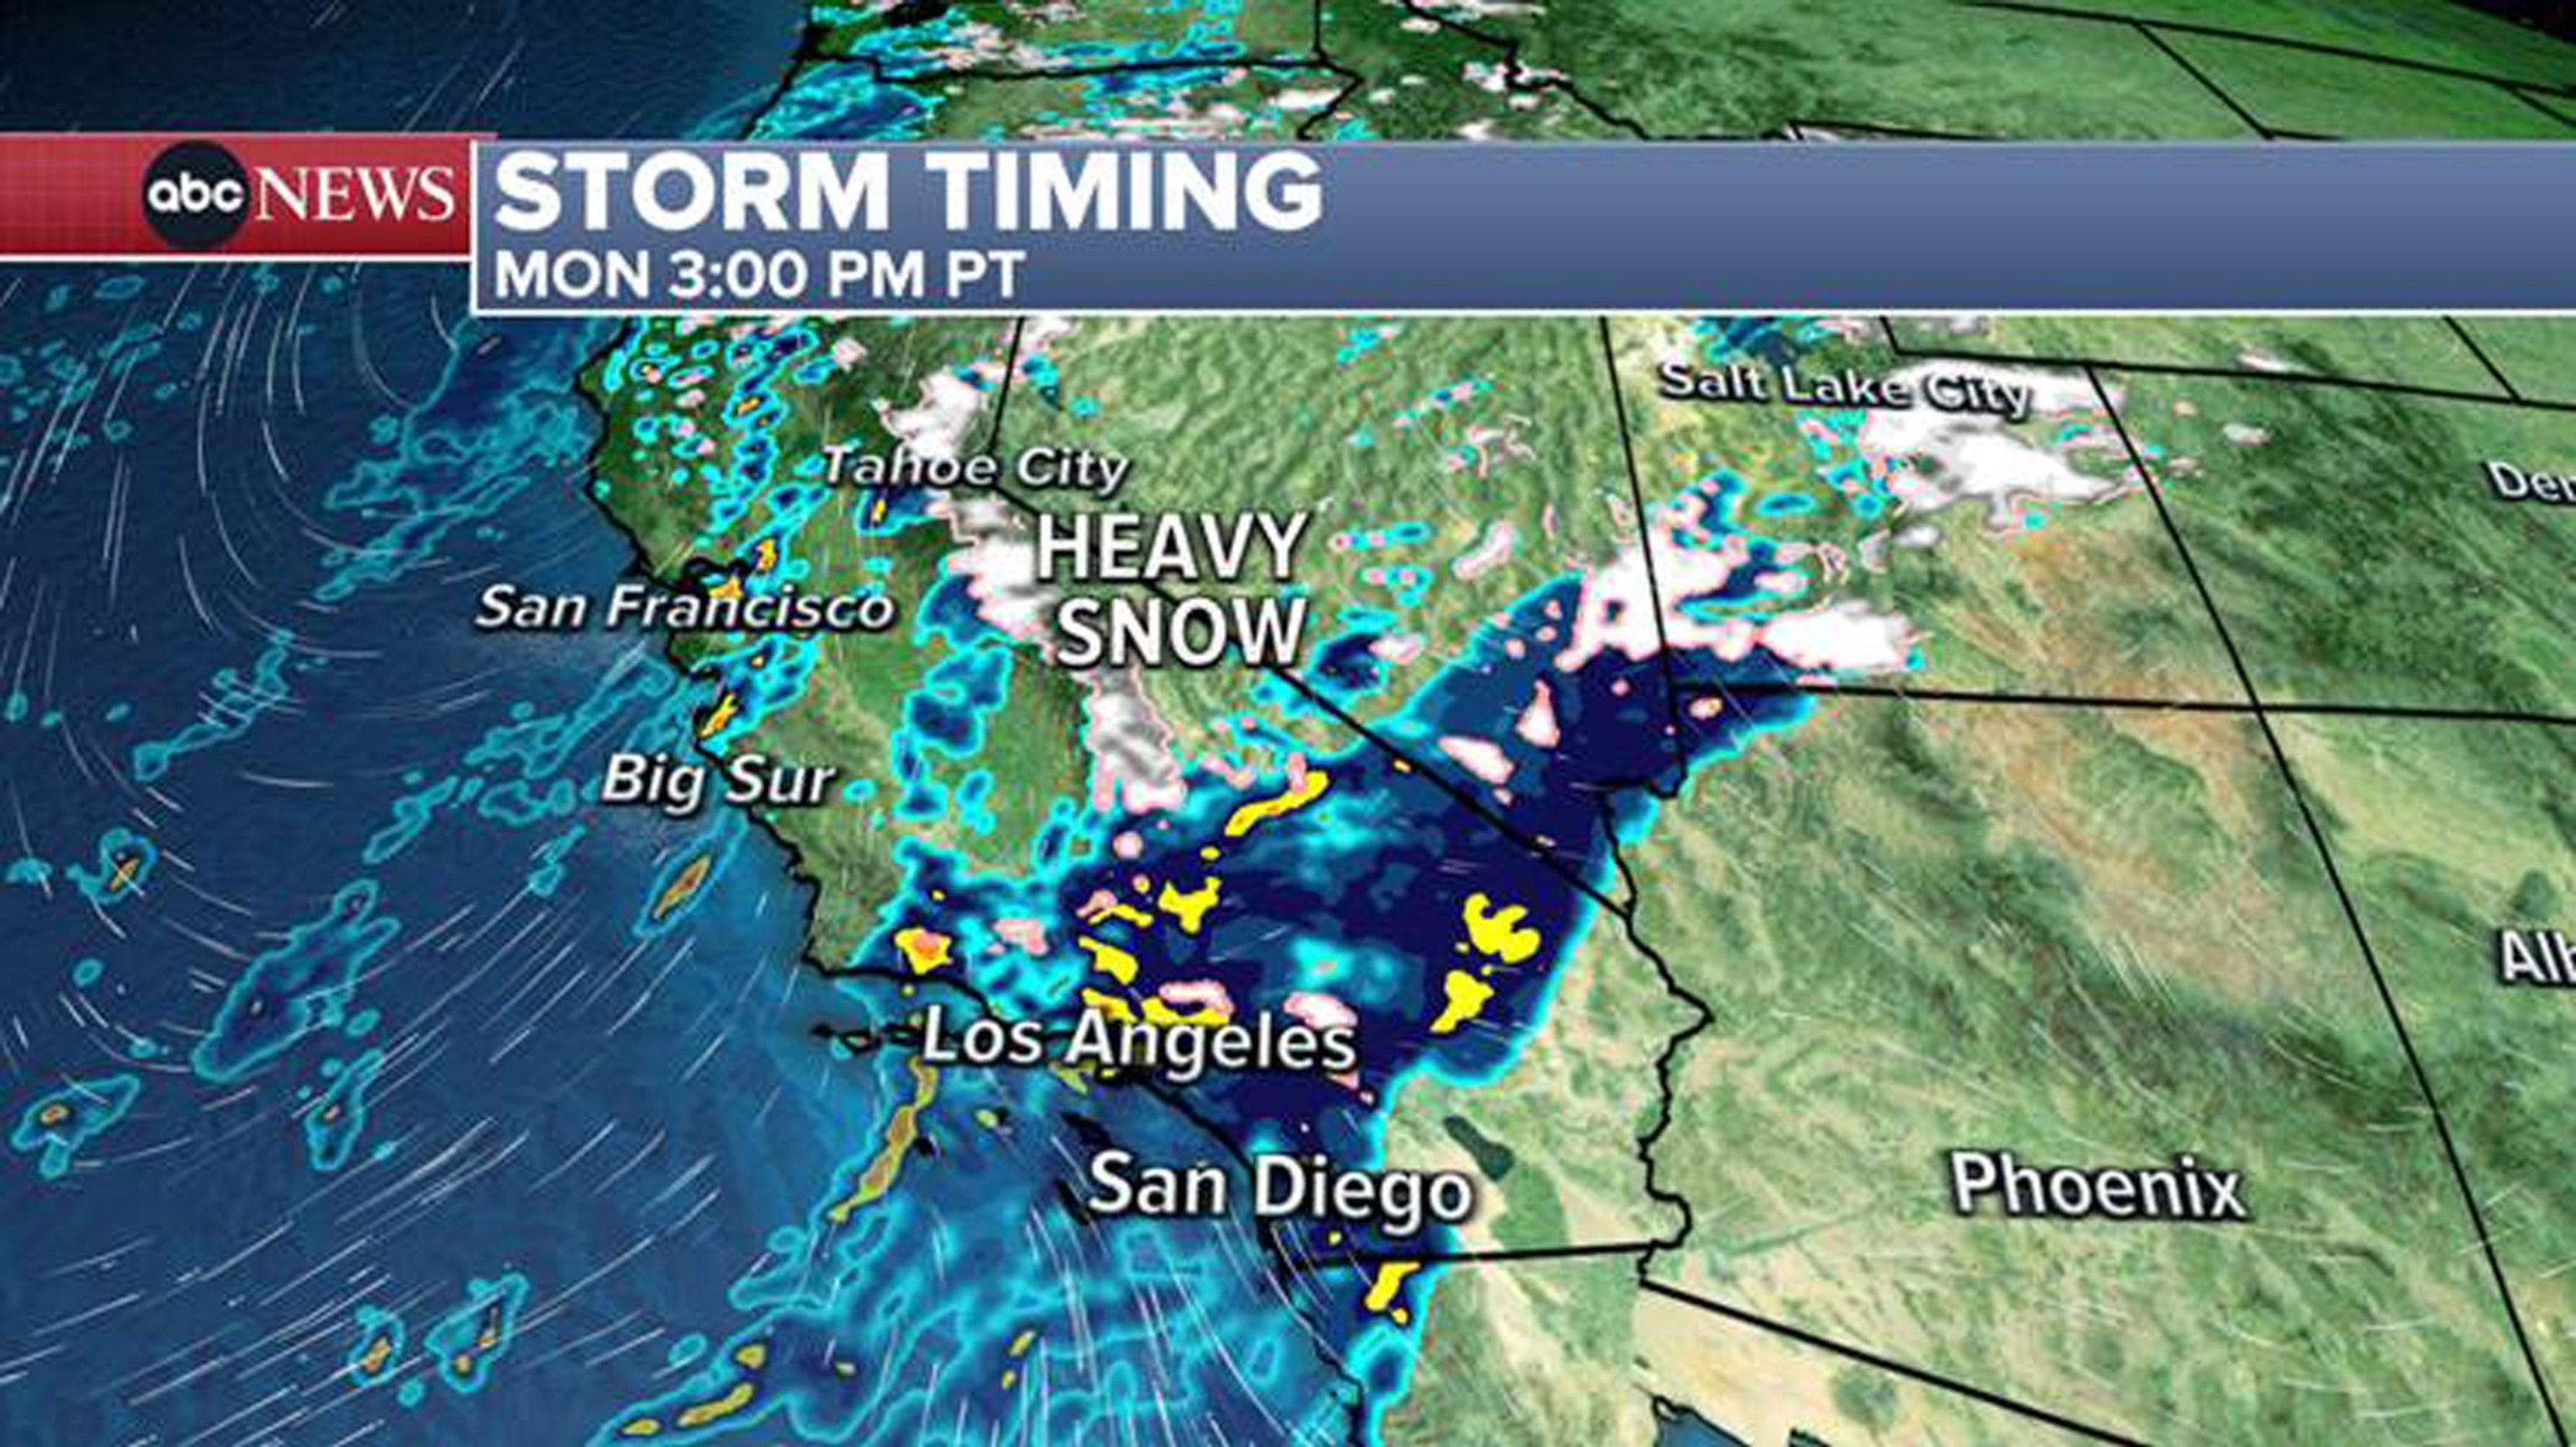 PHOTO: 3pm Monday (6pm ET) – light to moderate rain continues from the Bay Area to San Diego along with heavy snow in the mountains. The flood threat will continue.